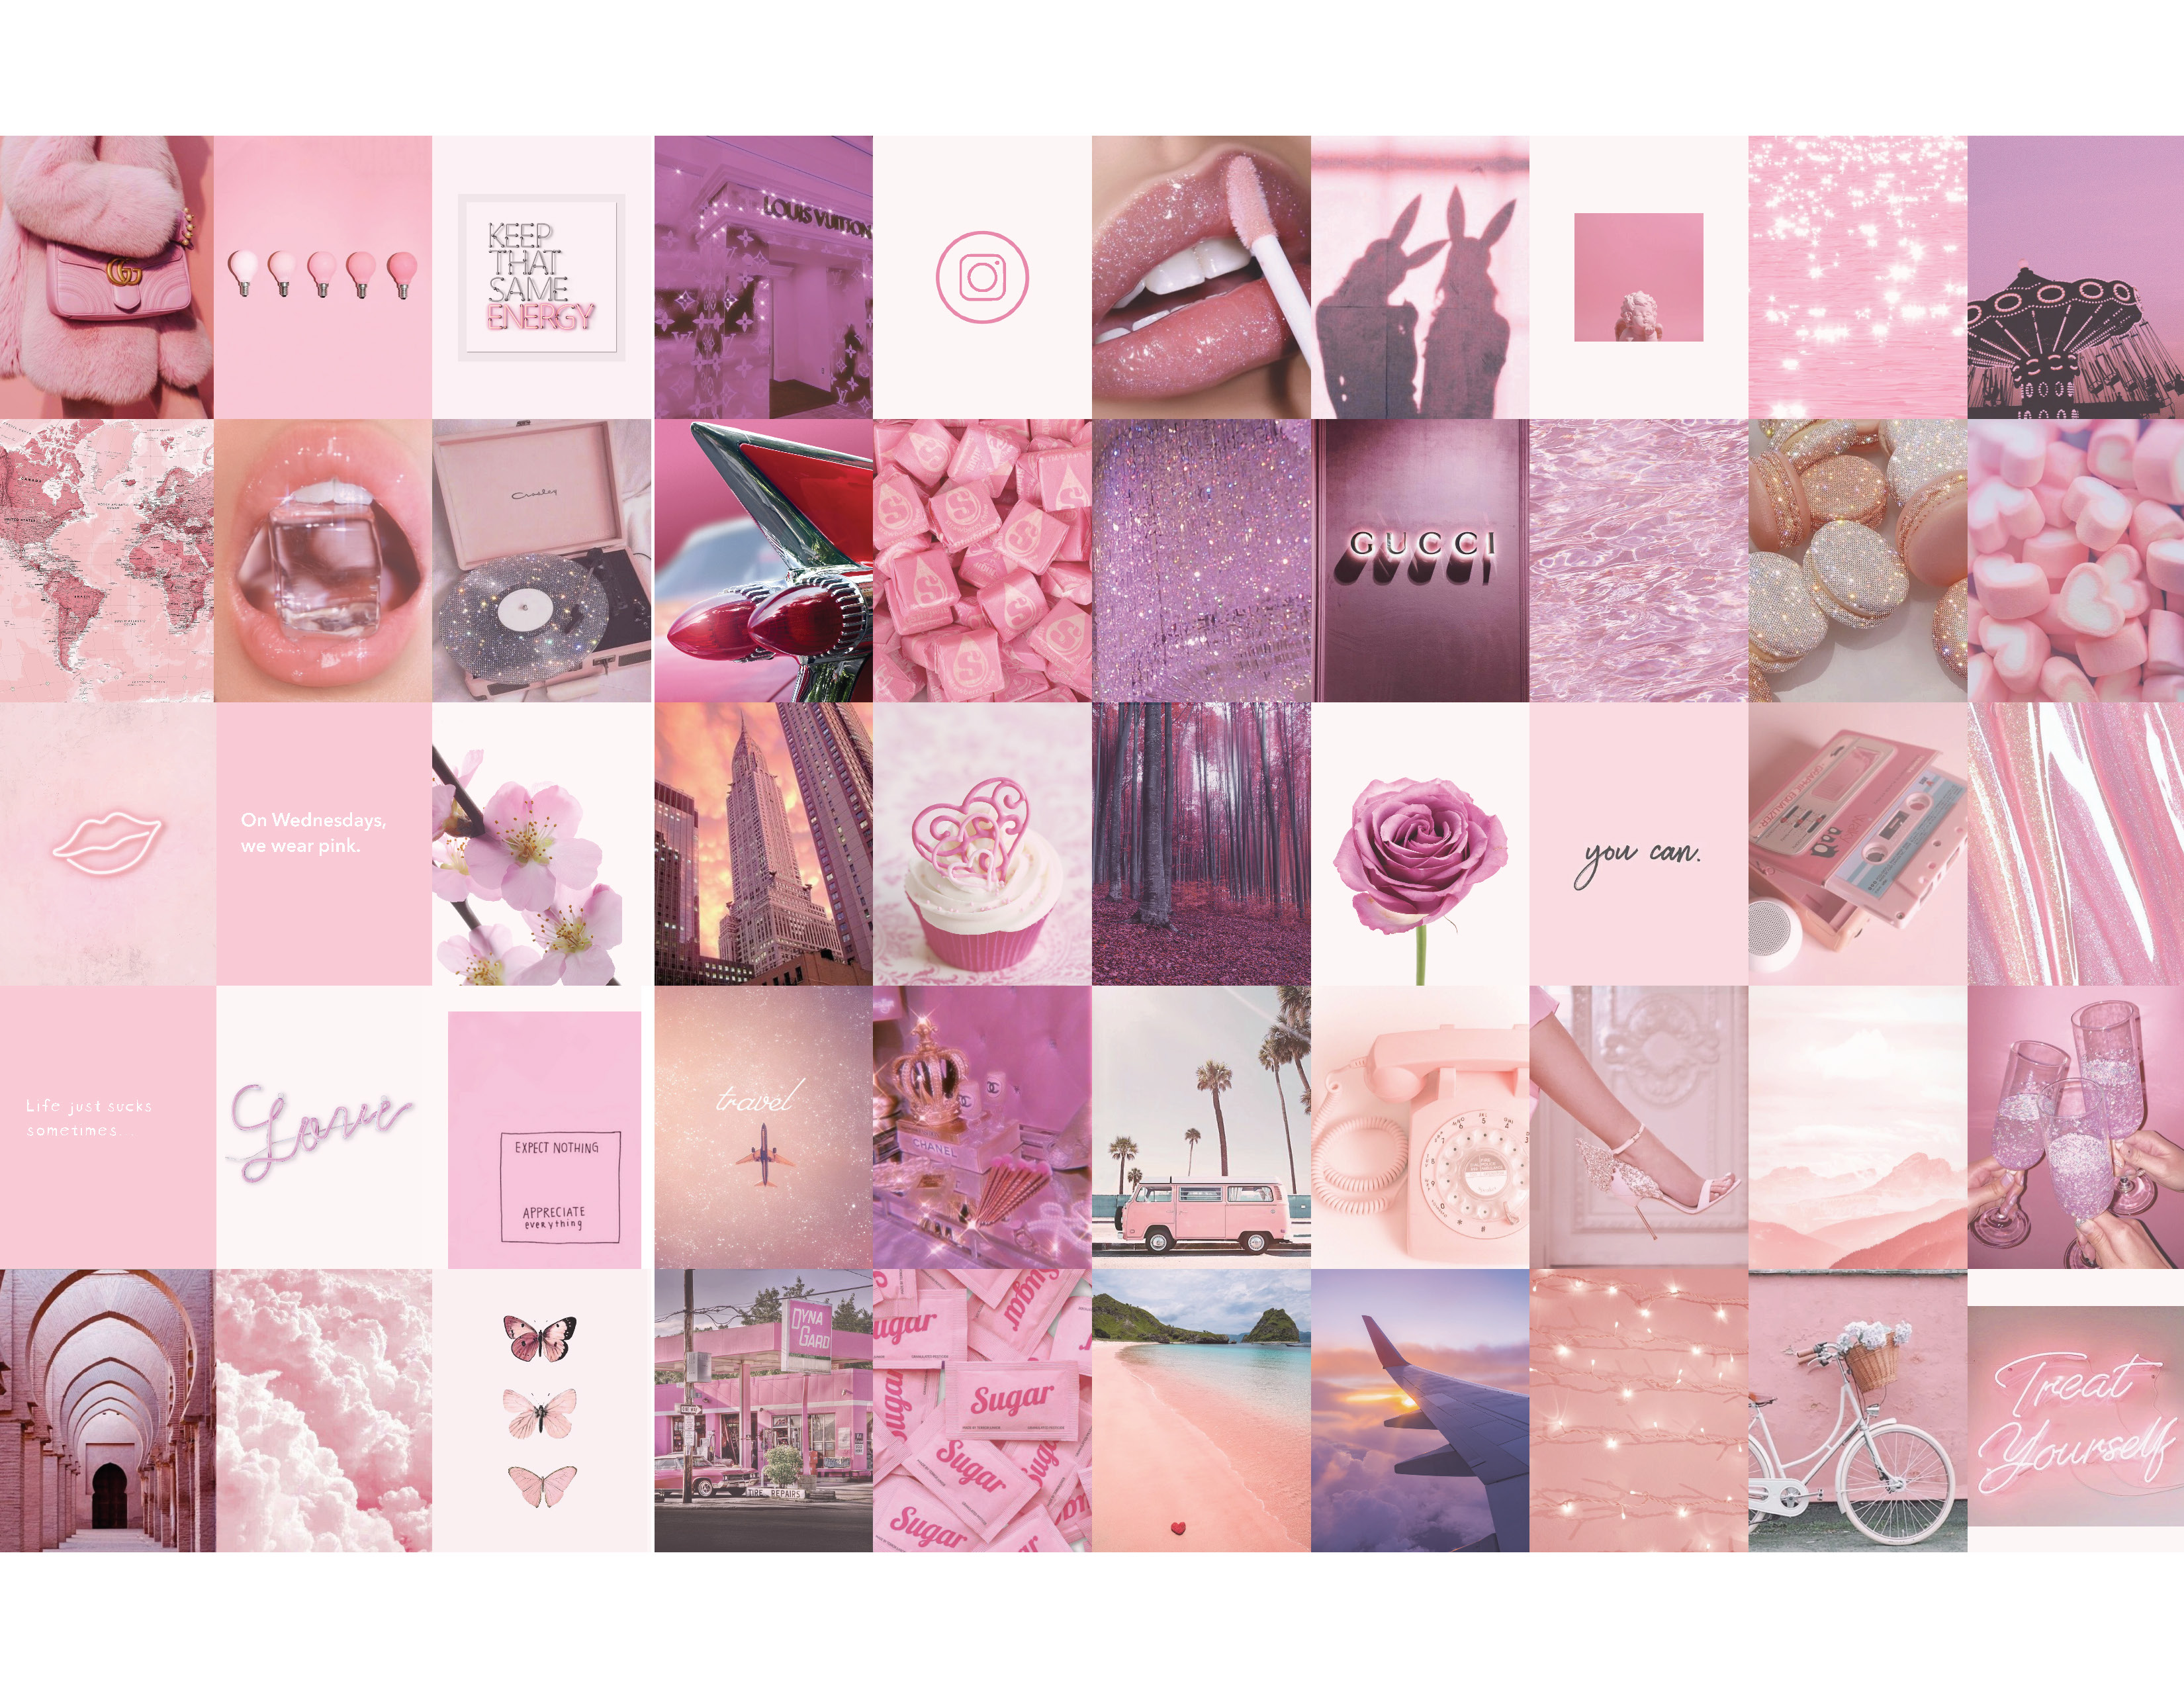 Collage Me Pink & Trendy! Stunningly Gorgeous Vintage Pink Aesthetic Wall Prints Collage Kit Set of 50 Photo Home Room Decor Posters Postcards